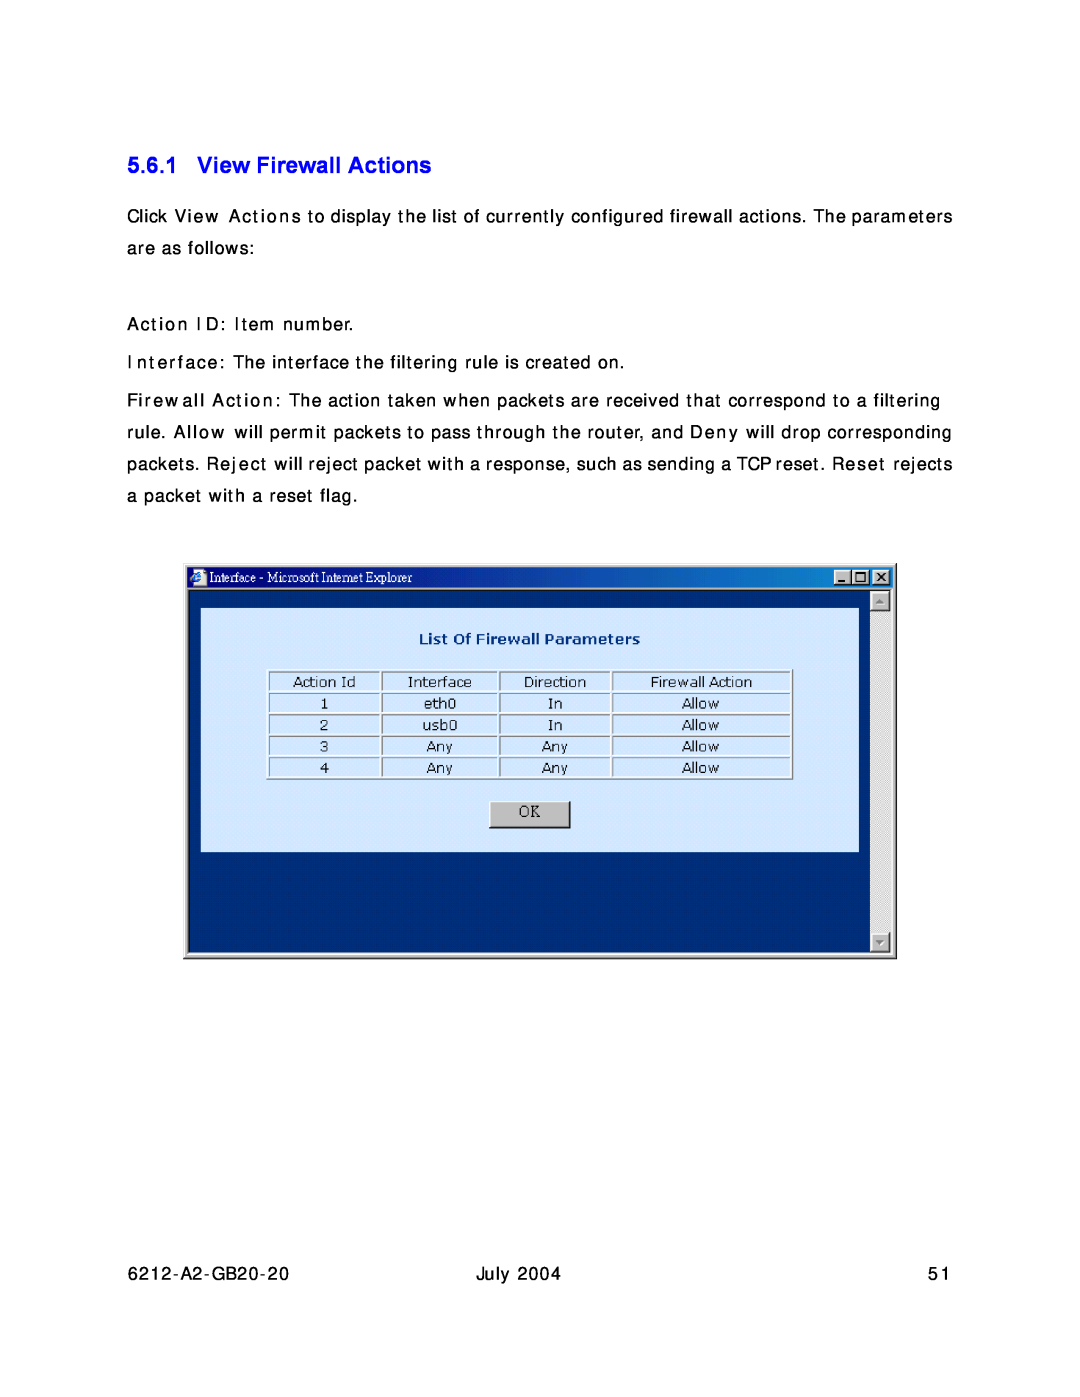 Paradyne 6212 manual View Firewall Actions 